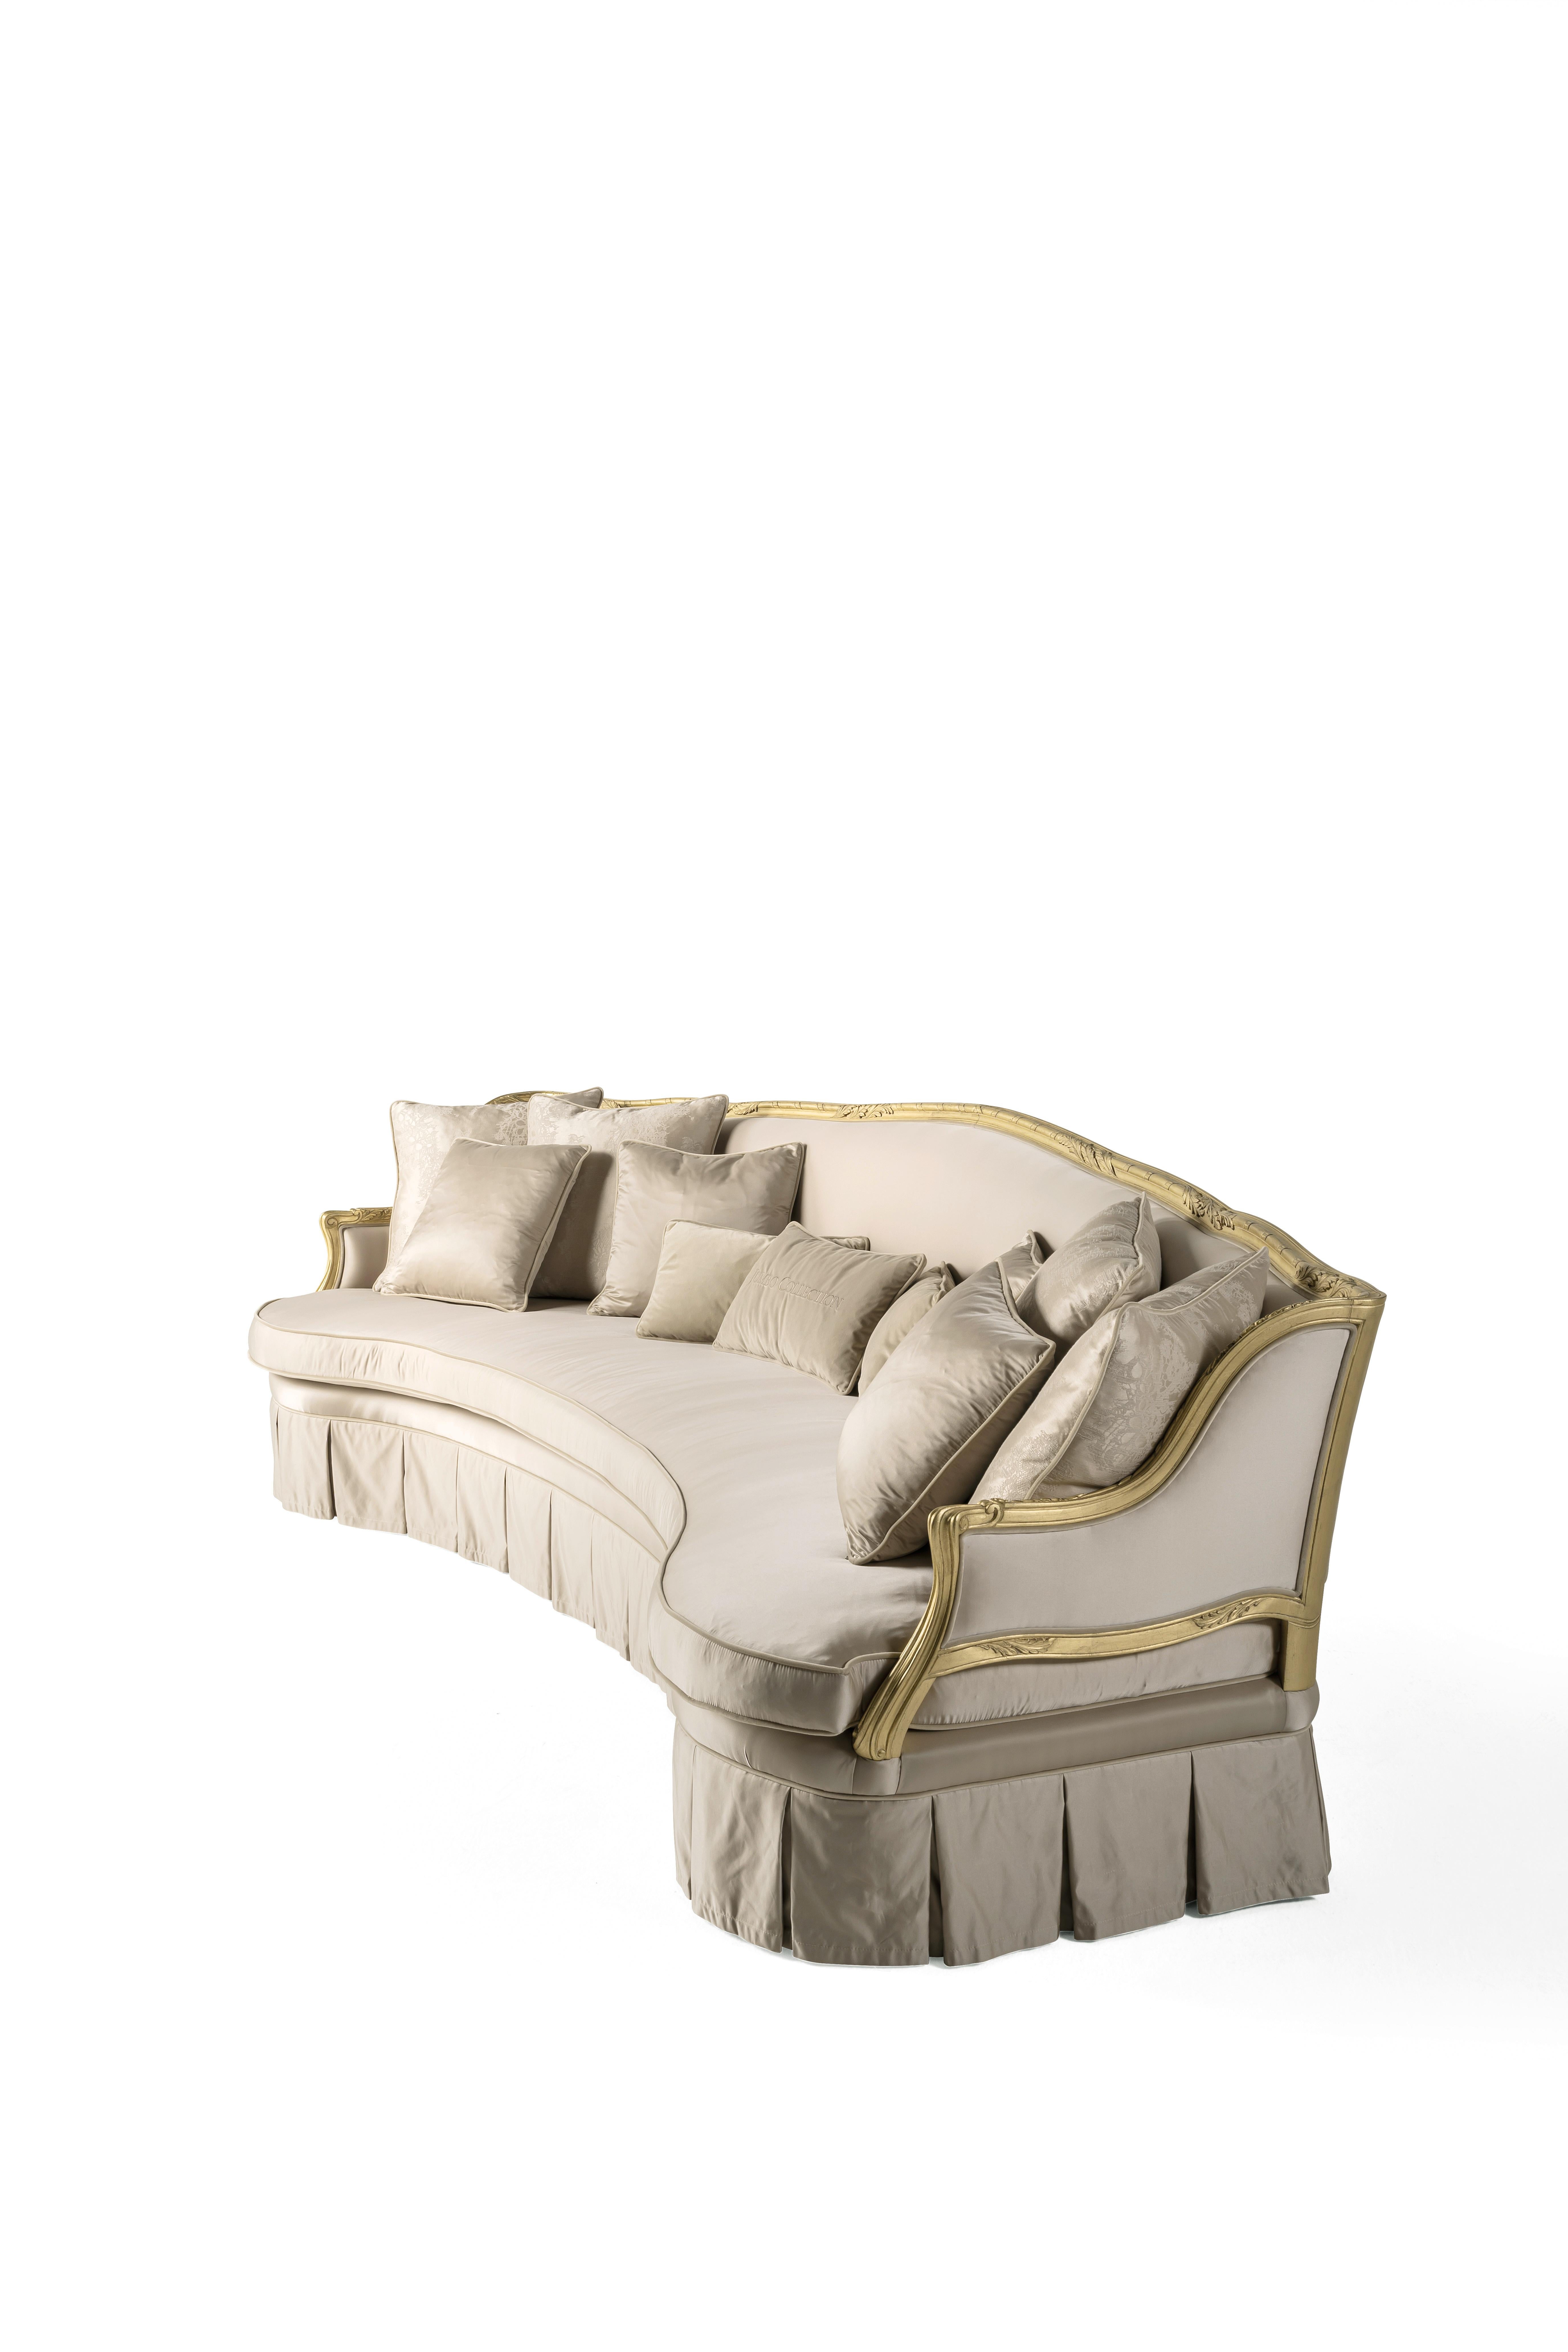 Italian 21st Century Eglantine 3-Seater Sofa in Fabric with Gold Leaf finishing For Sale